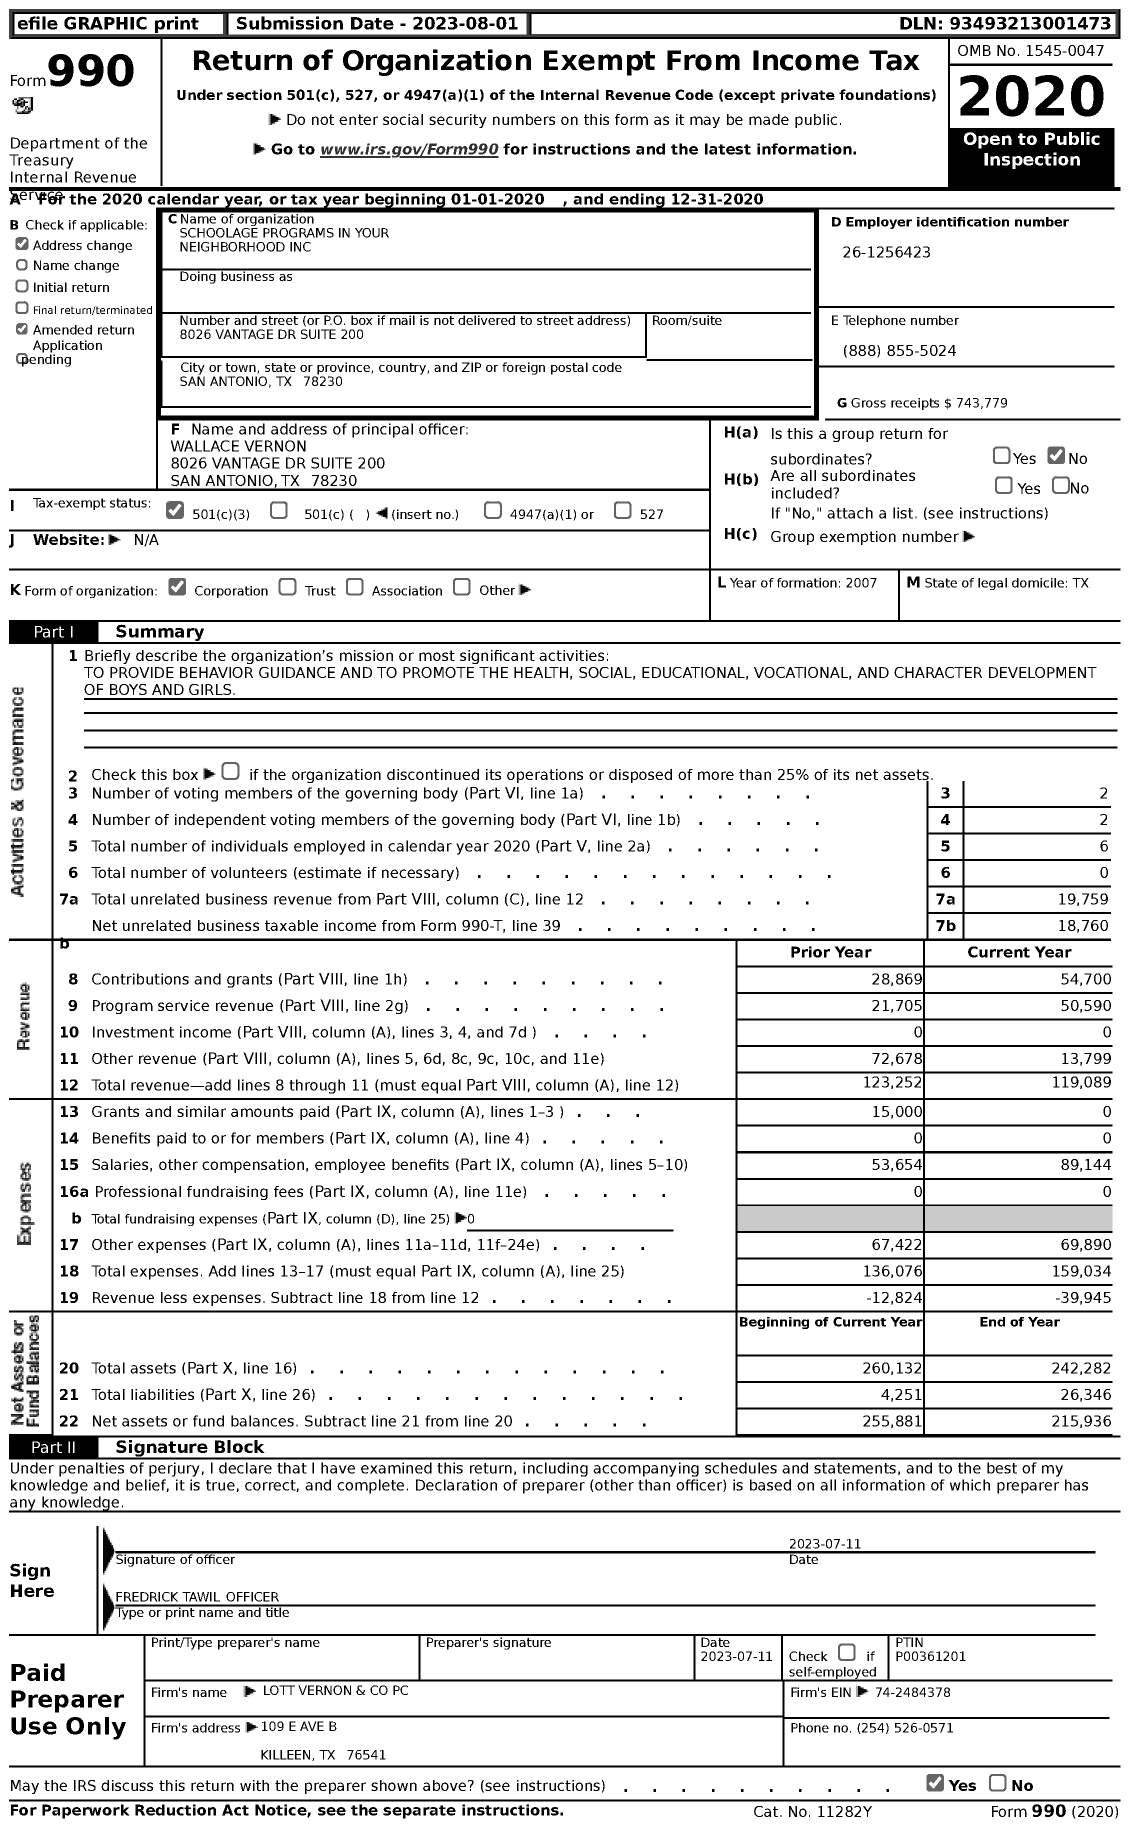 Image of first page of 2020 Form 990 for Schoolage Programs in Your Neighborhood